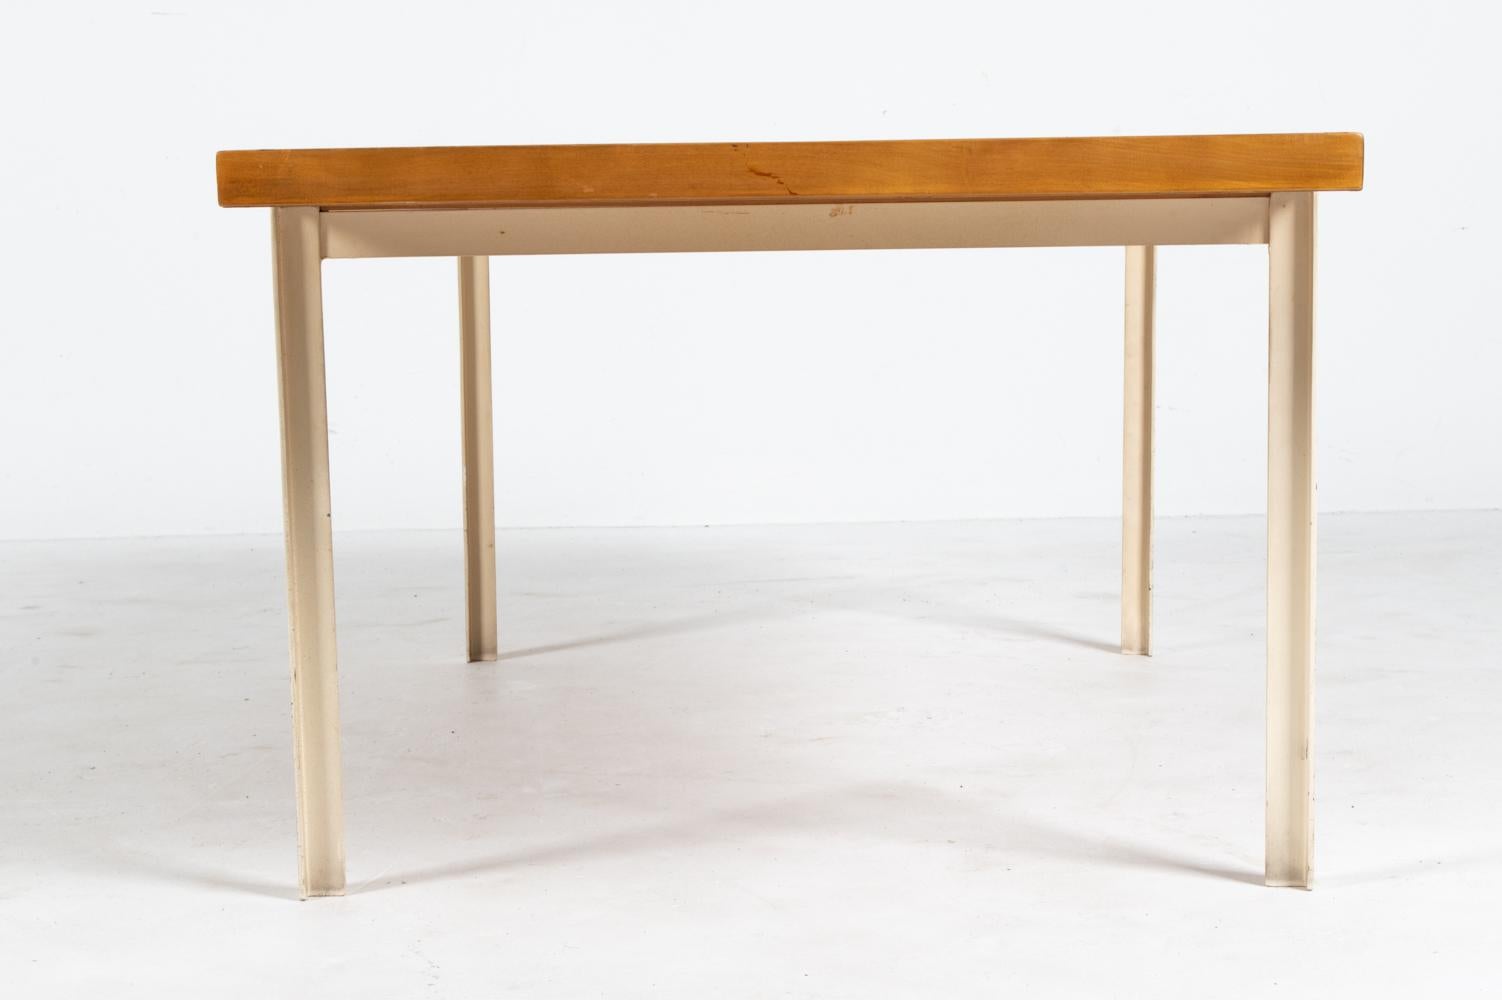 Metal Rare Florence Knoll T-Angle Coffee Table in Birch; Knoll International c. 1960's For Sale